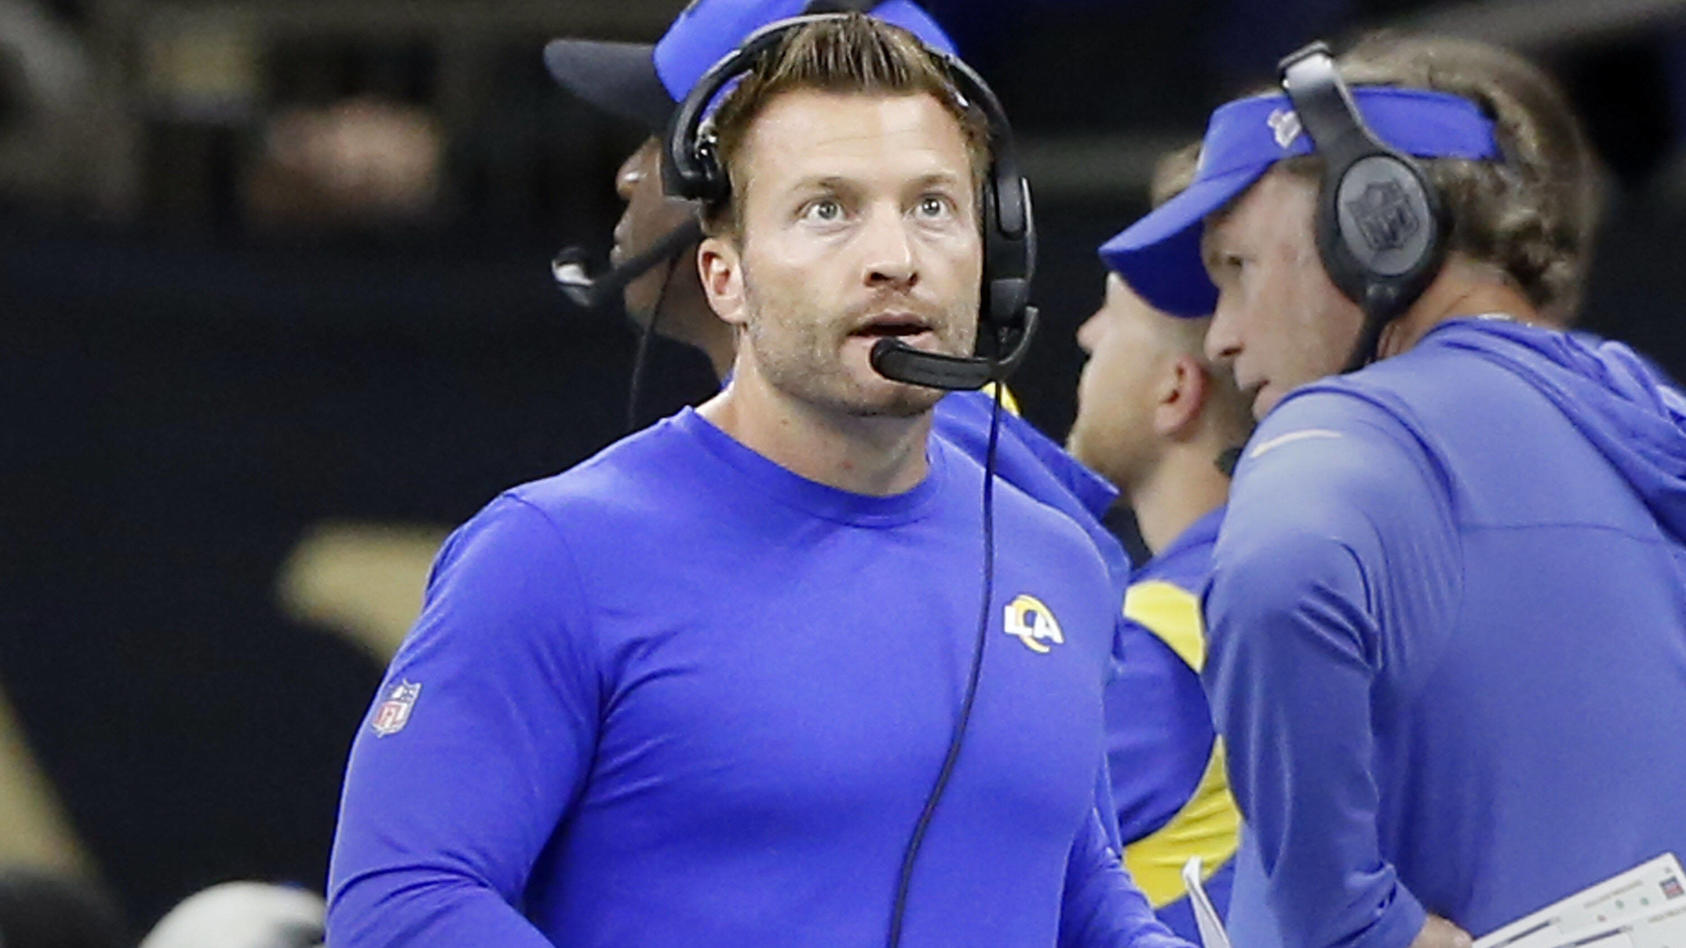  Los Angeles Rams head coach Sean McVay looks up at the replay screen during the game with the New Orleans Saints at the Caesars Superdome in New Orleans on Sunday, November 20, 2022. PUBLICATIONxINxGERxSUIxAUTxHUNxONLY NOP2022112010 AJxSISCO